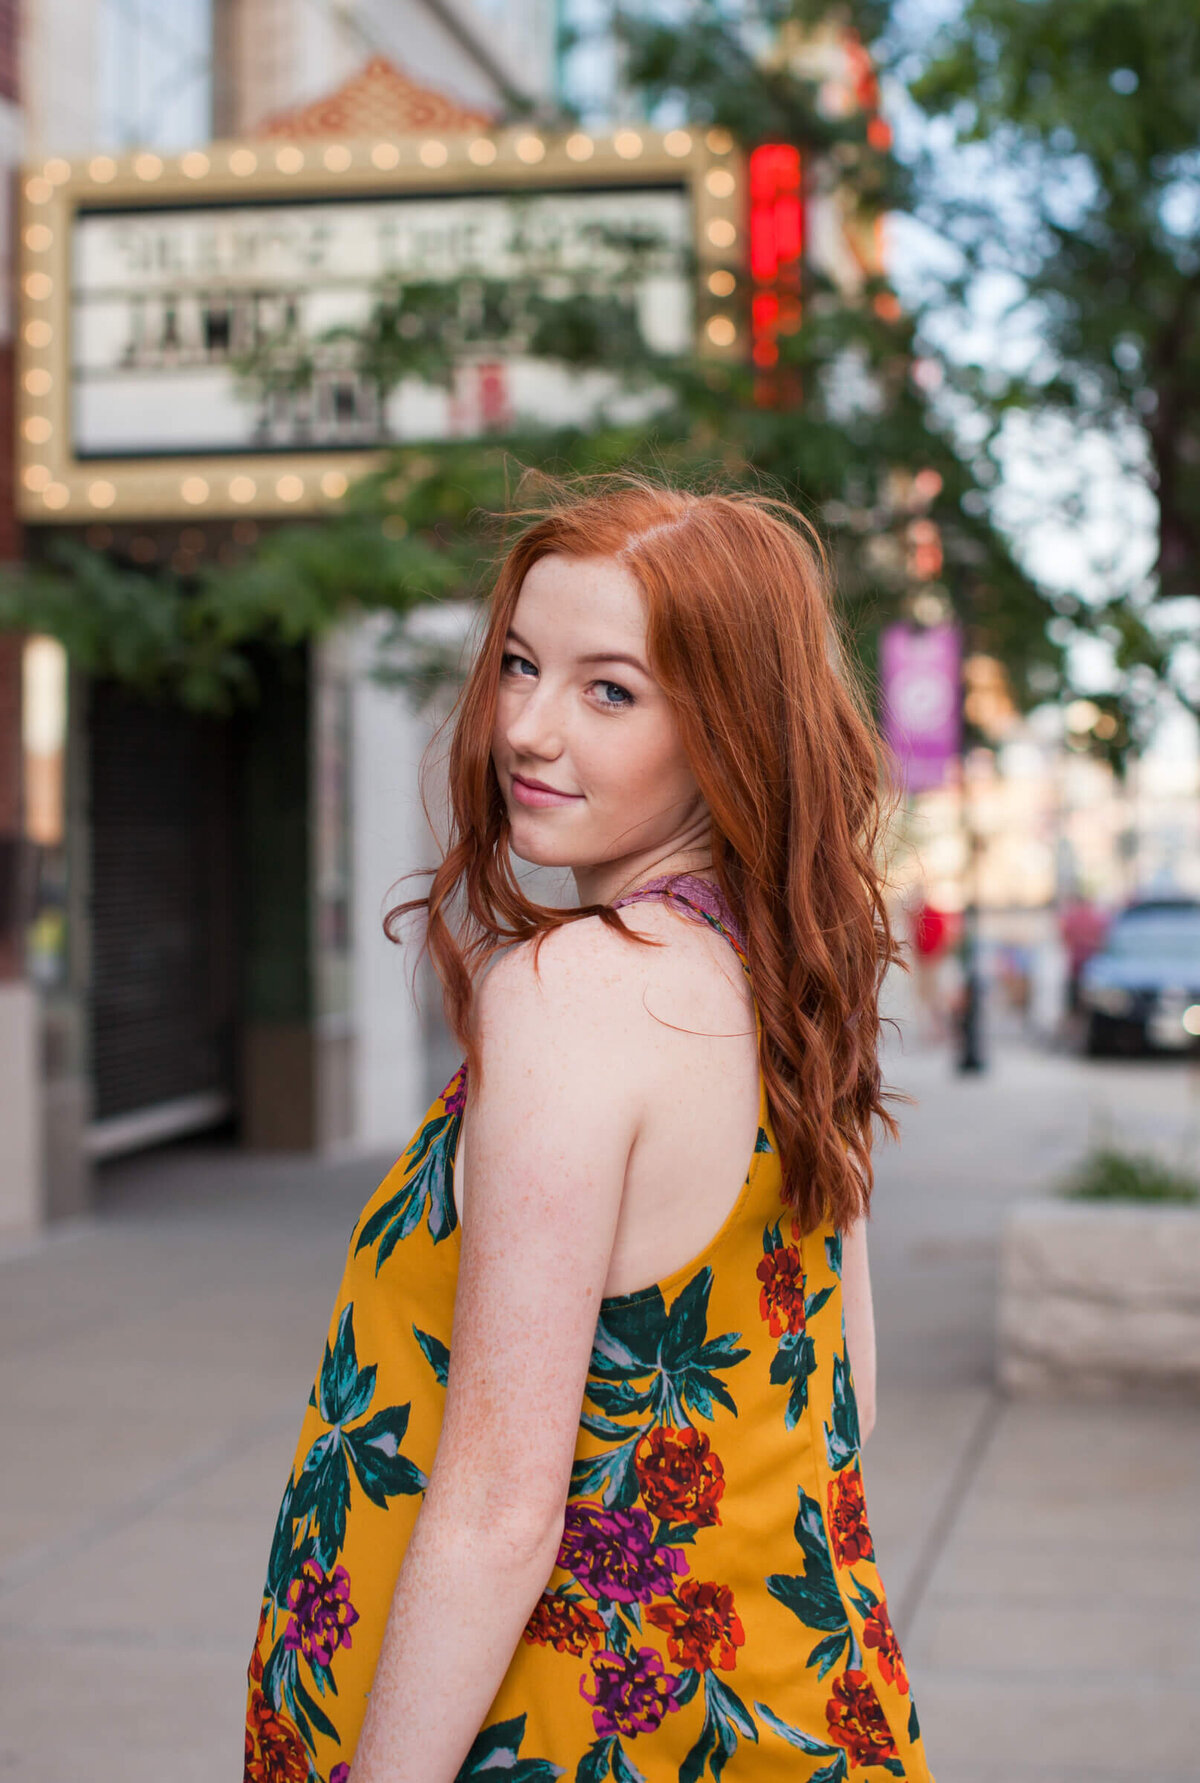 A lovely redhaired teen looks back over her shoulder with wind blown hair on a city street with a theater marquise in the background. Captured by Springfield, MO senior photographer Dynae Levingston.